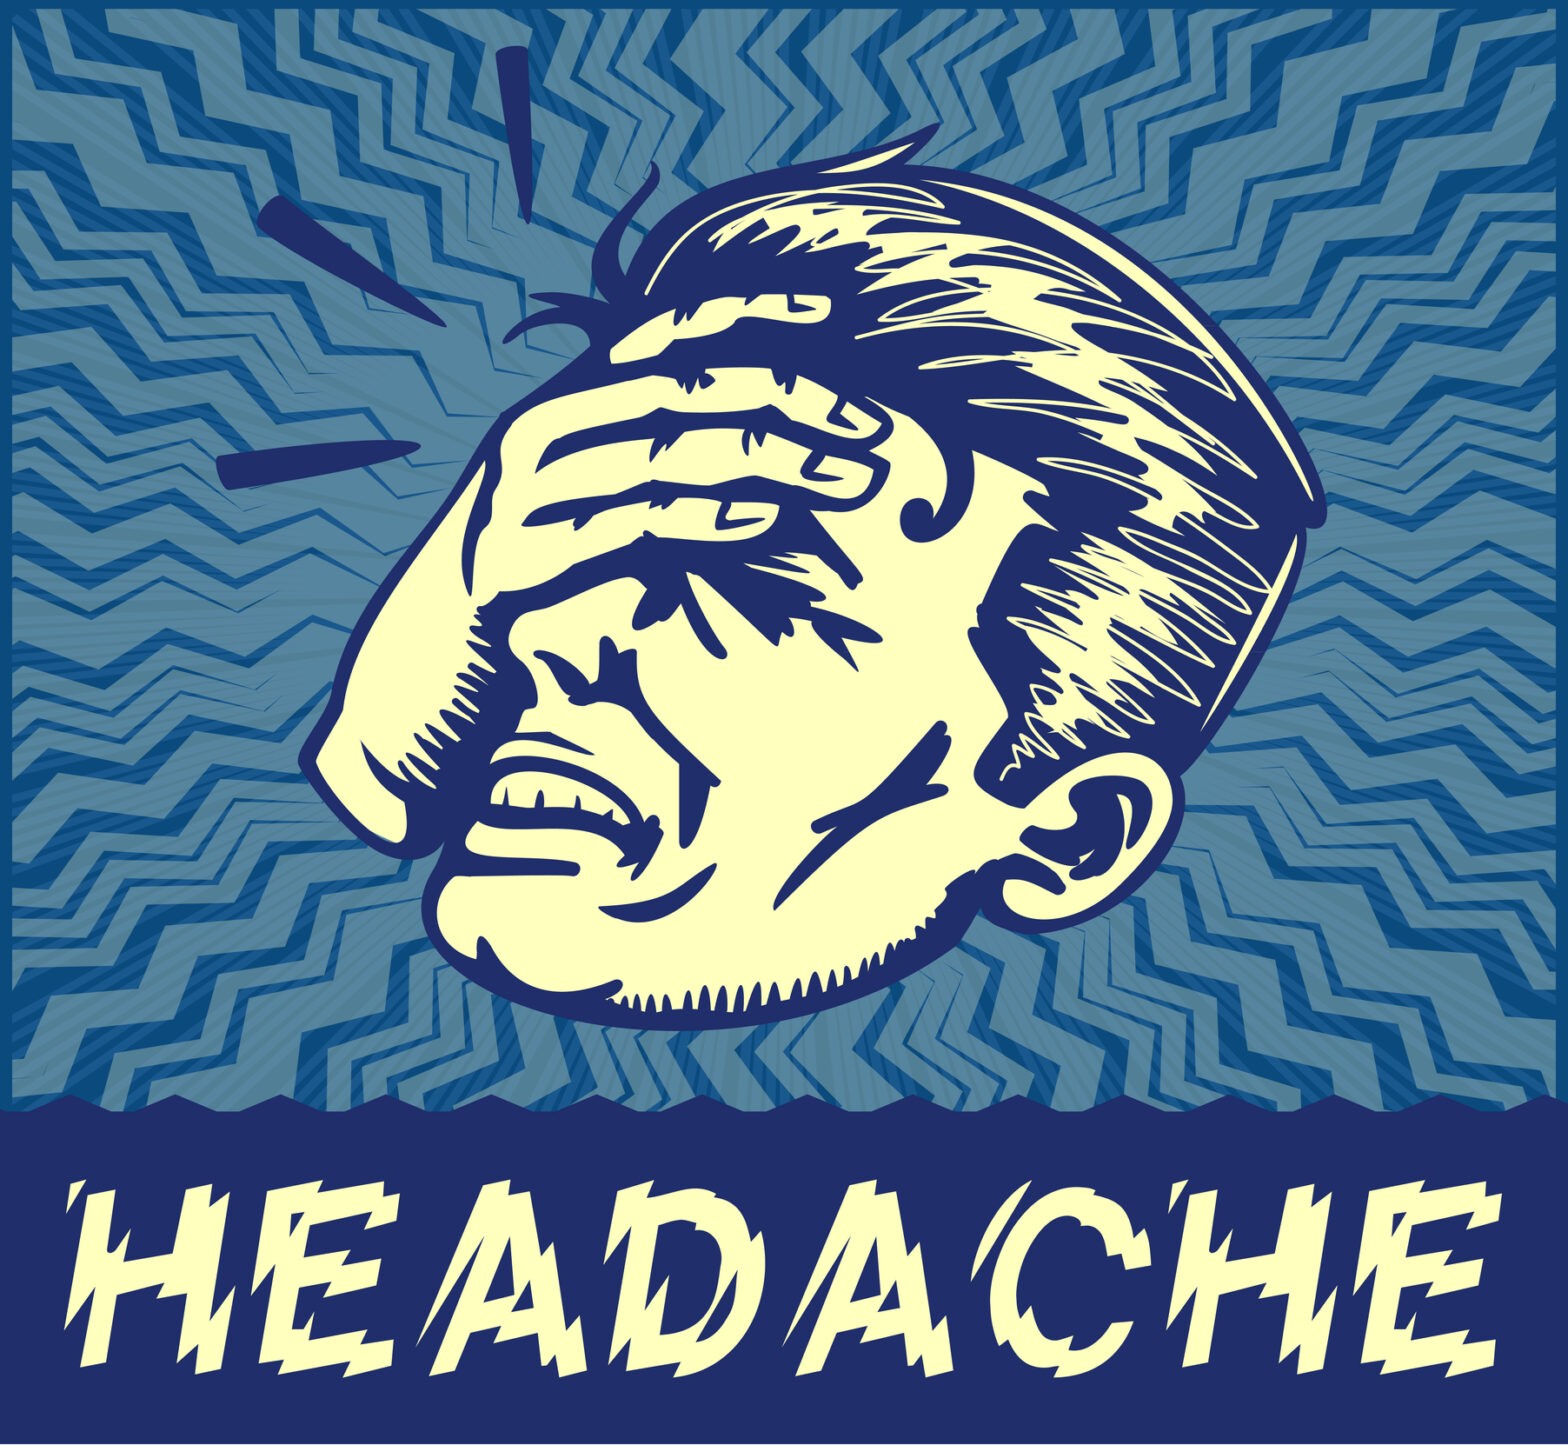 Featured image for post: You Don’t Have to Cope with HEADACHES, RELIEF is Here!